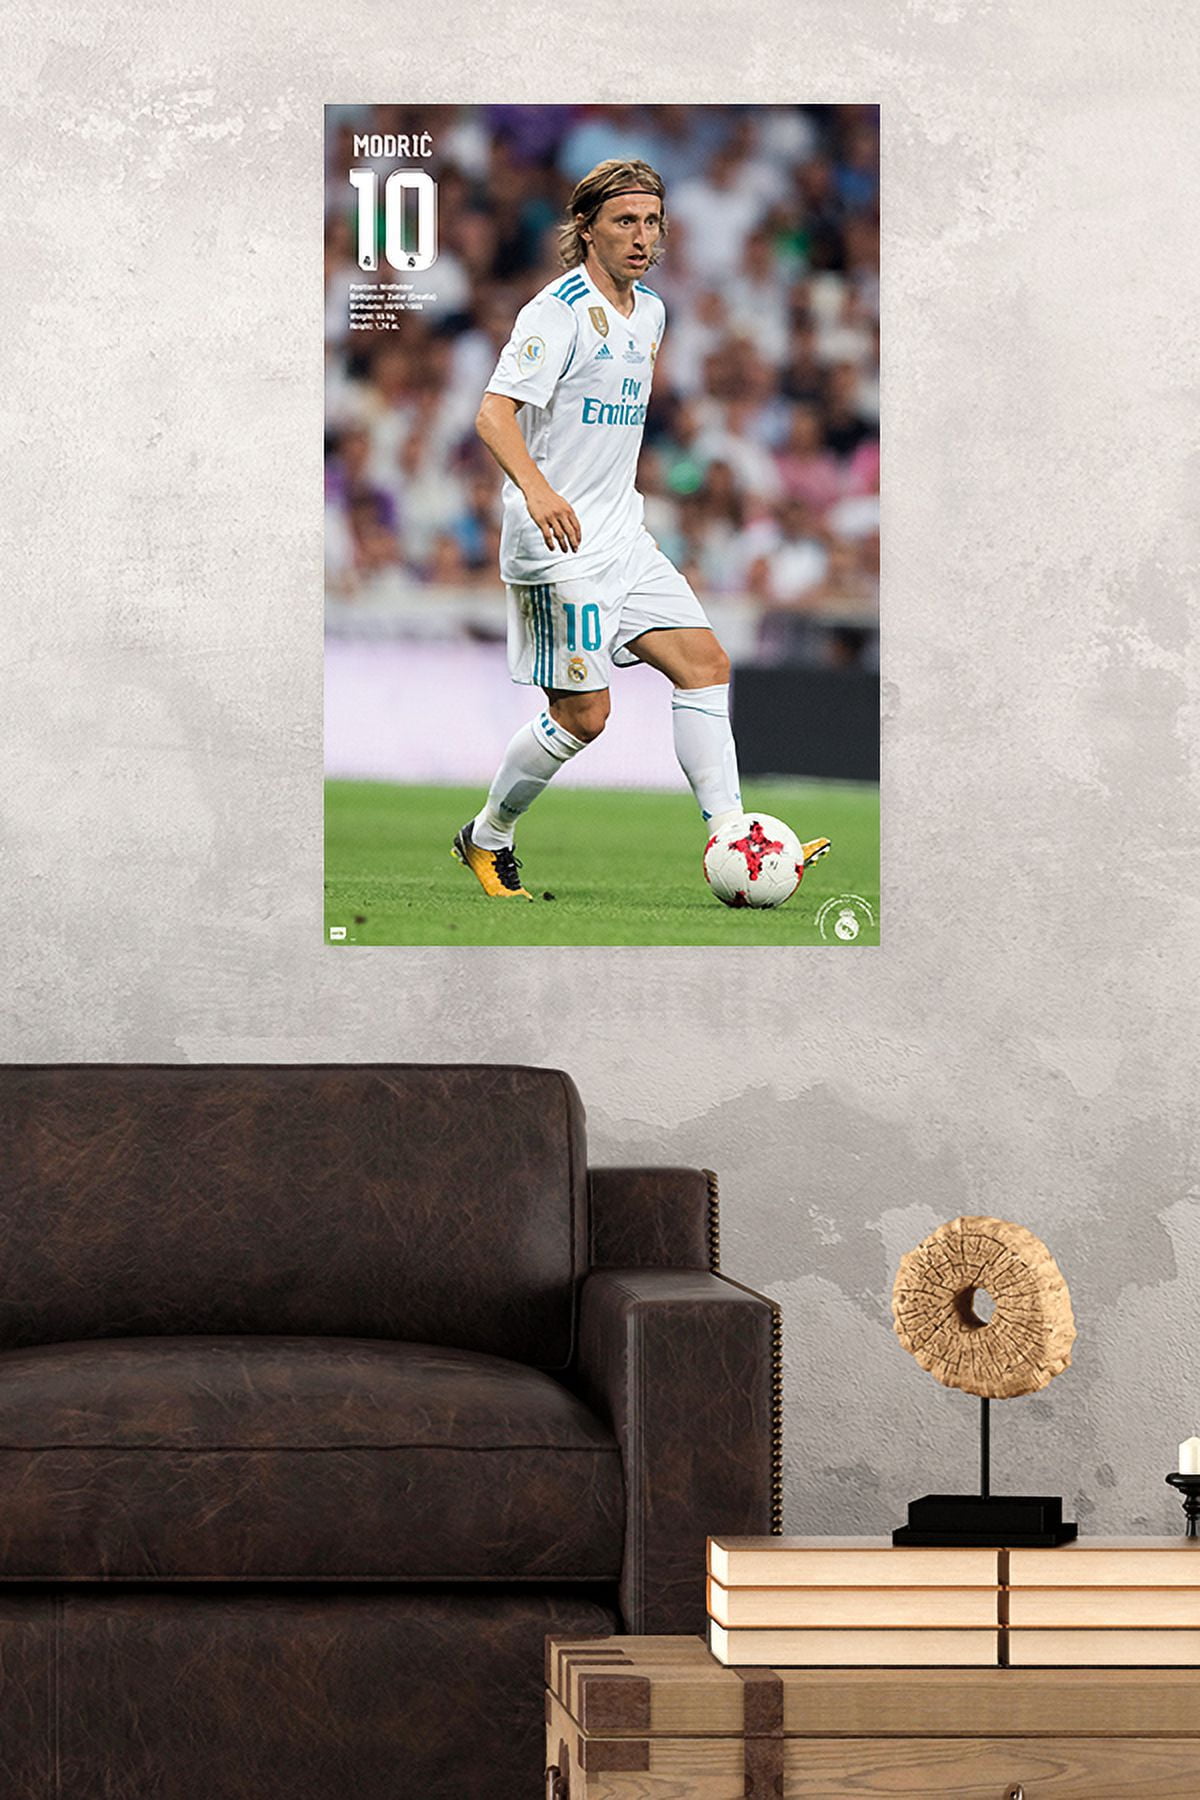 Luka Modric Poster, Real Madrid Poster, Poster Midfielder, Soccer Poster, Poster Soccer Player, Portrait Poster, Home Decor